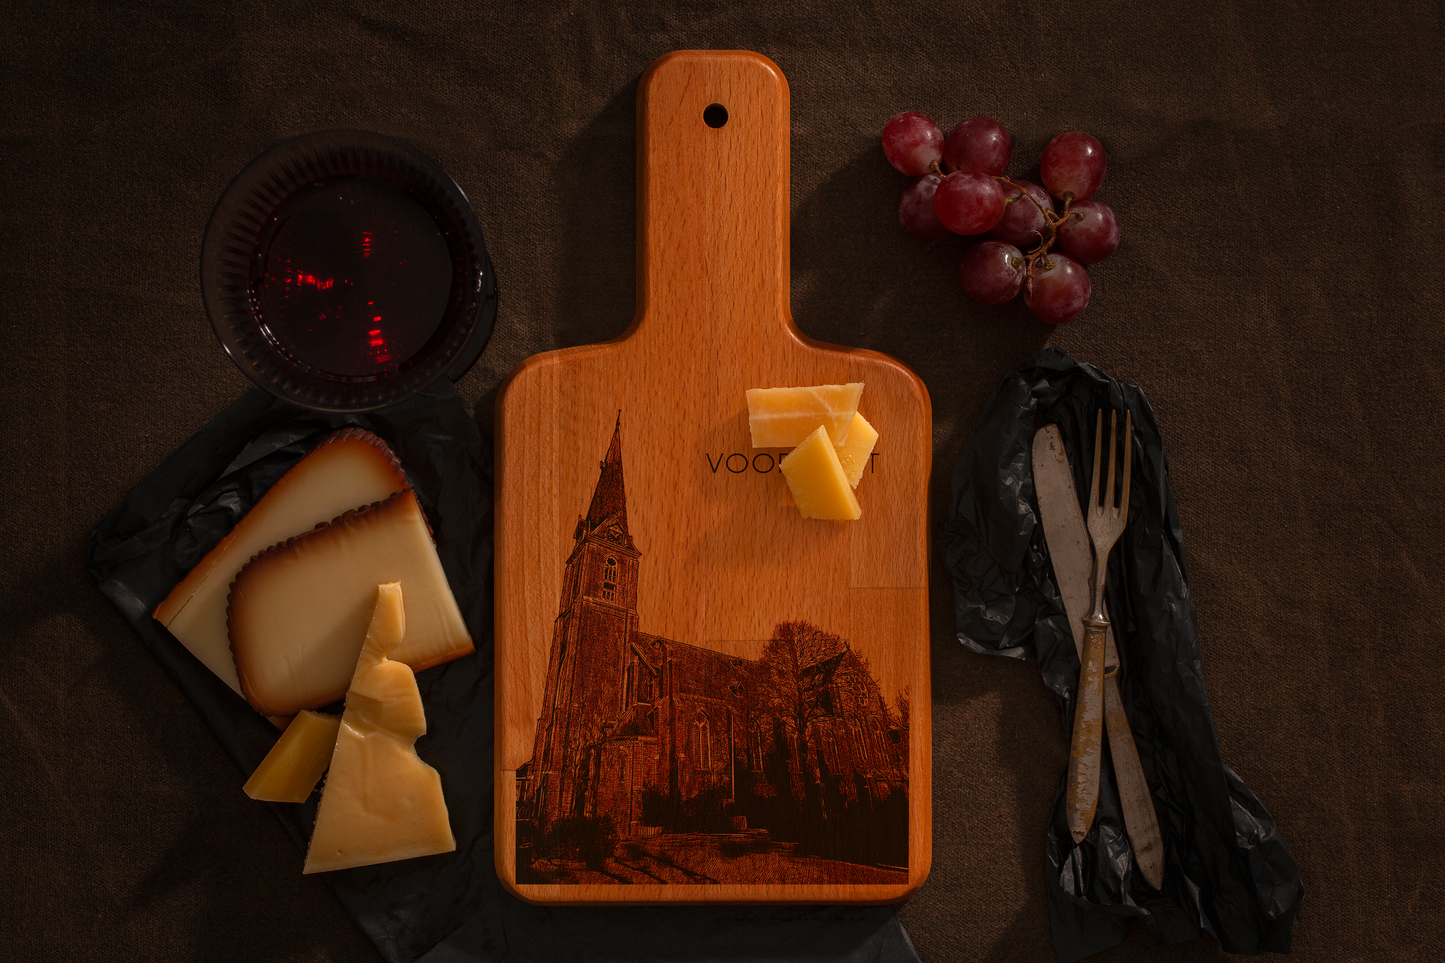 Voorhout, De Sint Bartholomeuskerk, cheese board, with cheese